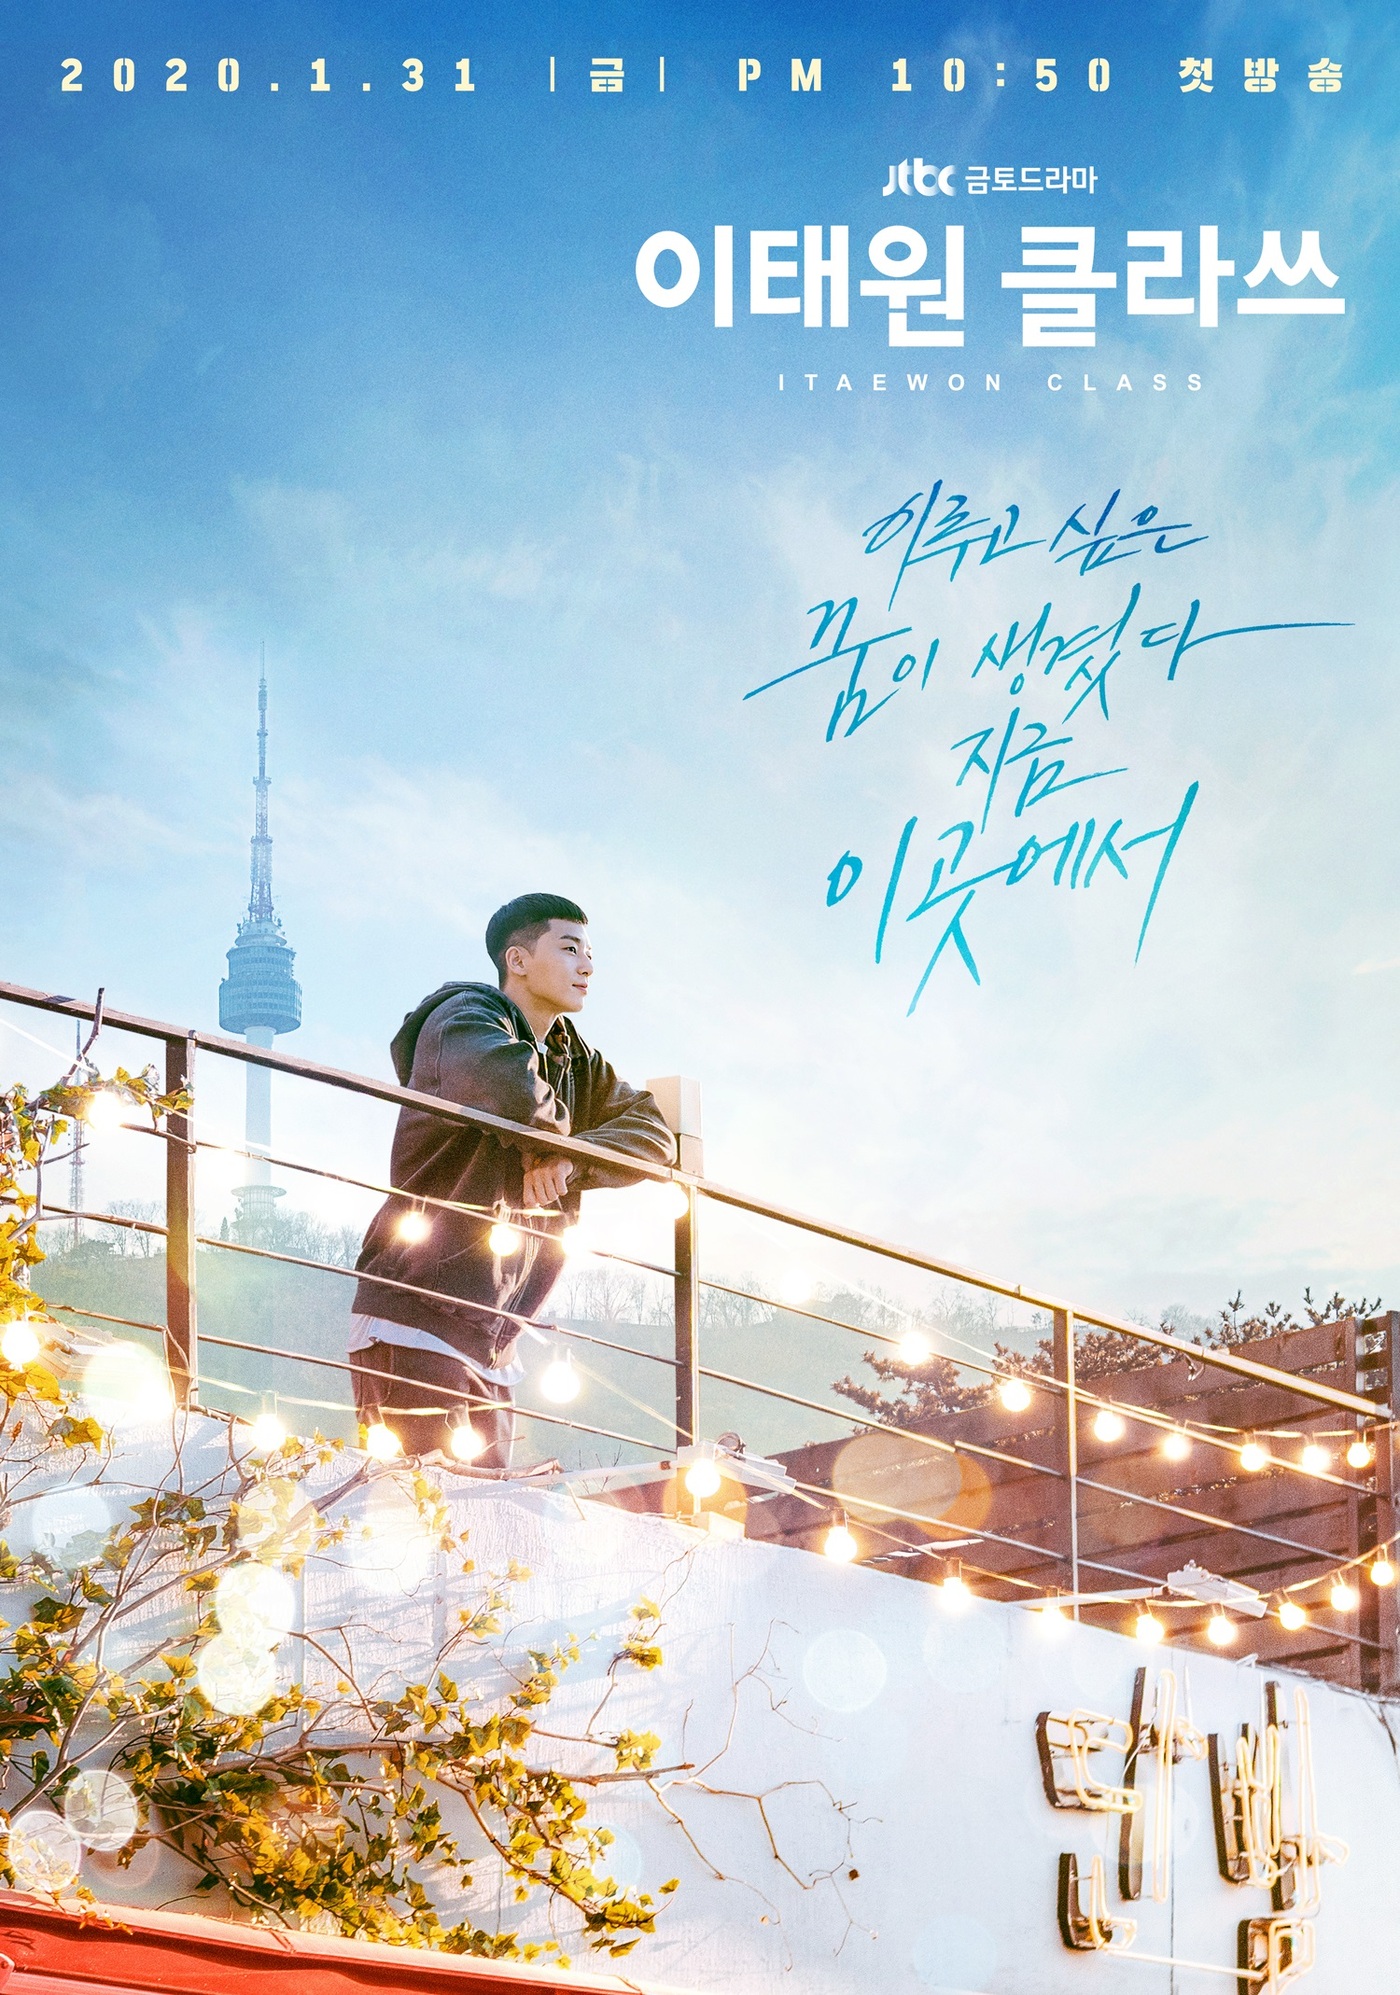 Seoul = = The Teaser Poster of Park Seo-joon, One Clath, was released.JTBCs new gilt drama One Clath (directed by Kim Seong-yoon/playwright Jo Kwang-jin/produced Showbox and its original/one-writing webtoon One Clath) unveiled Park Seo-joons Teaser Poster, which was transformed into a brilliantly bright and hot youth Roy on the 13th ...Itae One Clath, which is the next webtoon of the same name, is a work that depicts the hip rebellion of youths who are united in an unreasonable world, stubbornness and passengerhood.Their entrepreneurial myths, which pursue freedom with their own values ​​are dynamically unfolded on the small streets of Itae, which seem to have compressed the world.Director Kim Seong-yoon, who has been recognized for his sensual performance through Gurmigreen Moonlight and Discovery of Love, took megaphone and wrote a script by one author Jo Kwang-jin, who gave a pleasant fun and deep sympathy to the webtoon Itae One Clath.The released Teaser Poster shows Park Seo-joon, who is on the roof of Sanbam and shows the image of Itae One unfolding under his feet.Danbam is a store run by Park Seo-joon (Roy) in the play, a space where his dreams melt.Park Seo-joon is an act of Park Seo-joon, a straight-line young man who can not compromise injustice.He started a new dream challenge on the streets of Itae One, which entered with anger that does not fade, and he will offer a pleasant cider with an unfavorable counterattack against the big company Jangga in the food industry.I am looking forward to the birth of Park Seo-joon Roy, which will amplify the charm of Ones character, said the production team of One Clath. I would like to ask for your expectation and interest in the drama Itae One Clath, which was reborn with a richer attraction and deep story.On the other hand, Itae One Clath is the first production drama of Showbox that has shown movies with workability and popularity such as Taxi Drive, Assassination and Tunnel.It will be broadcasted at 10:50 pm on January 31 following Chocolate.